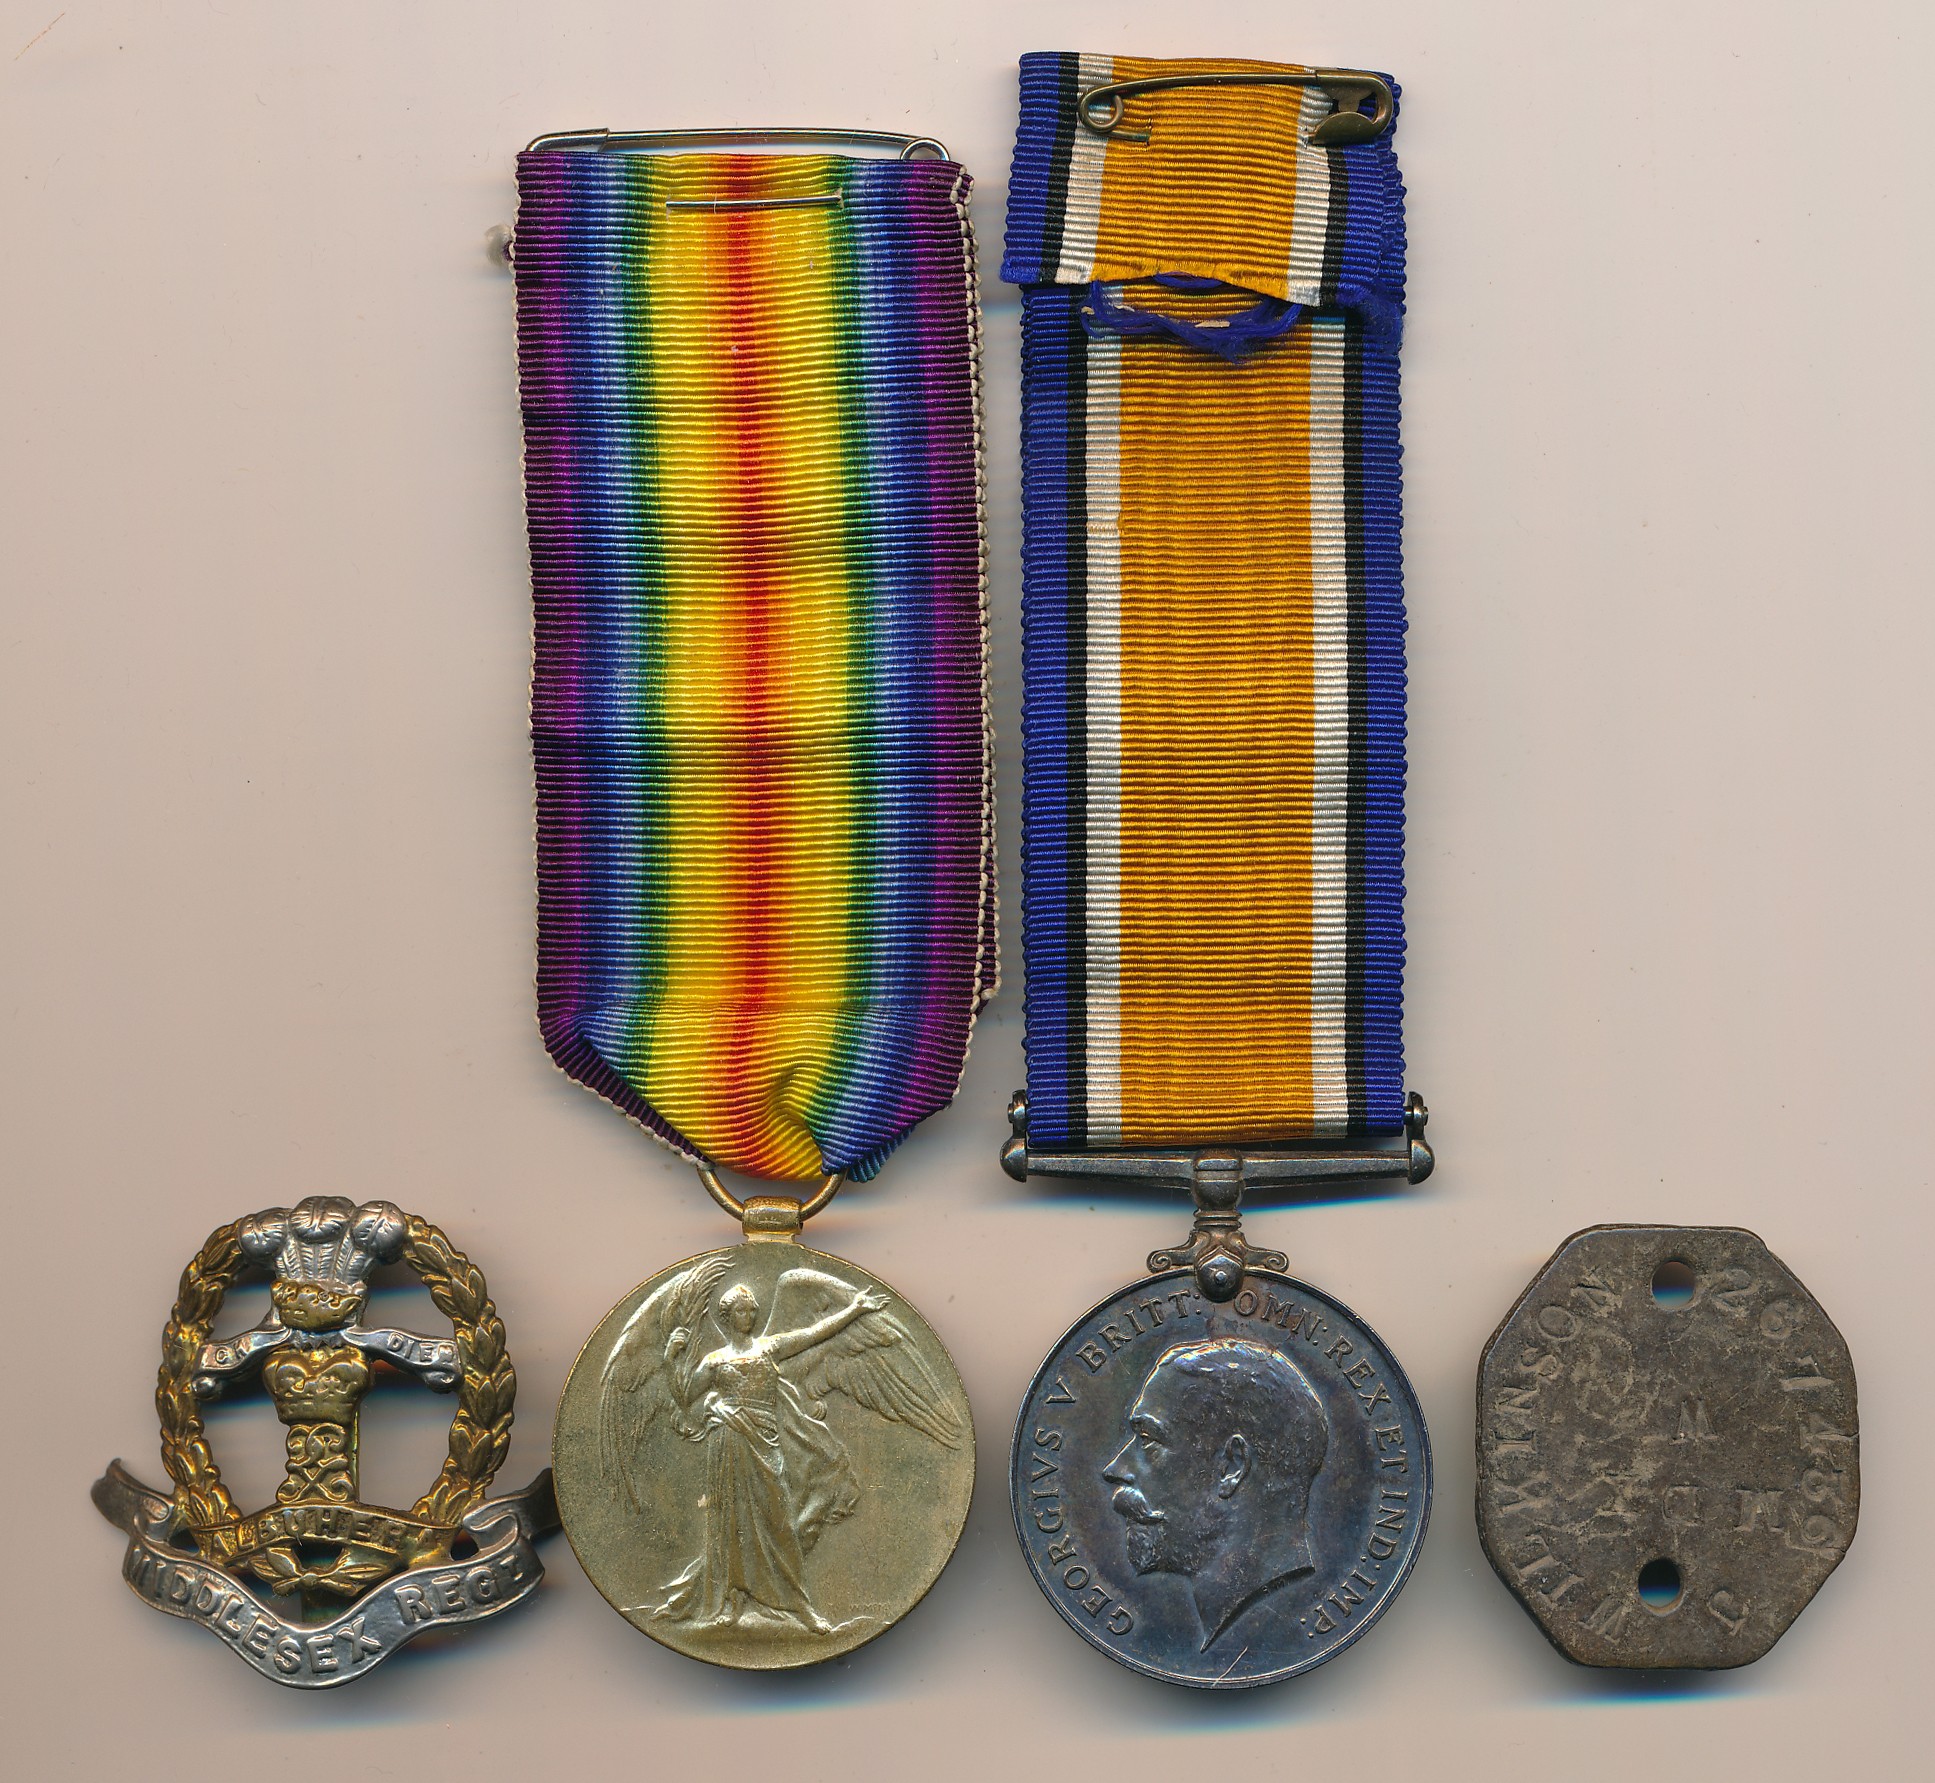 First World War - War Medal and Victory Medal to 267436 Pte J. Wilkinson Midd’x R. nearly mint. With